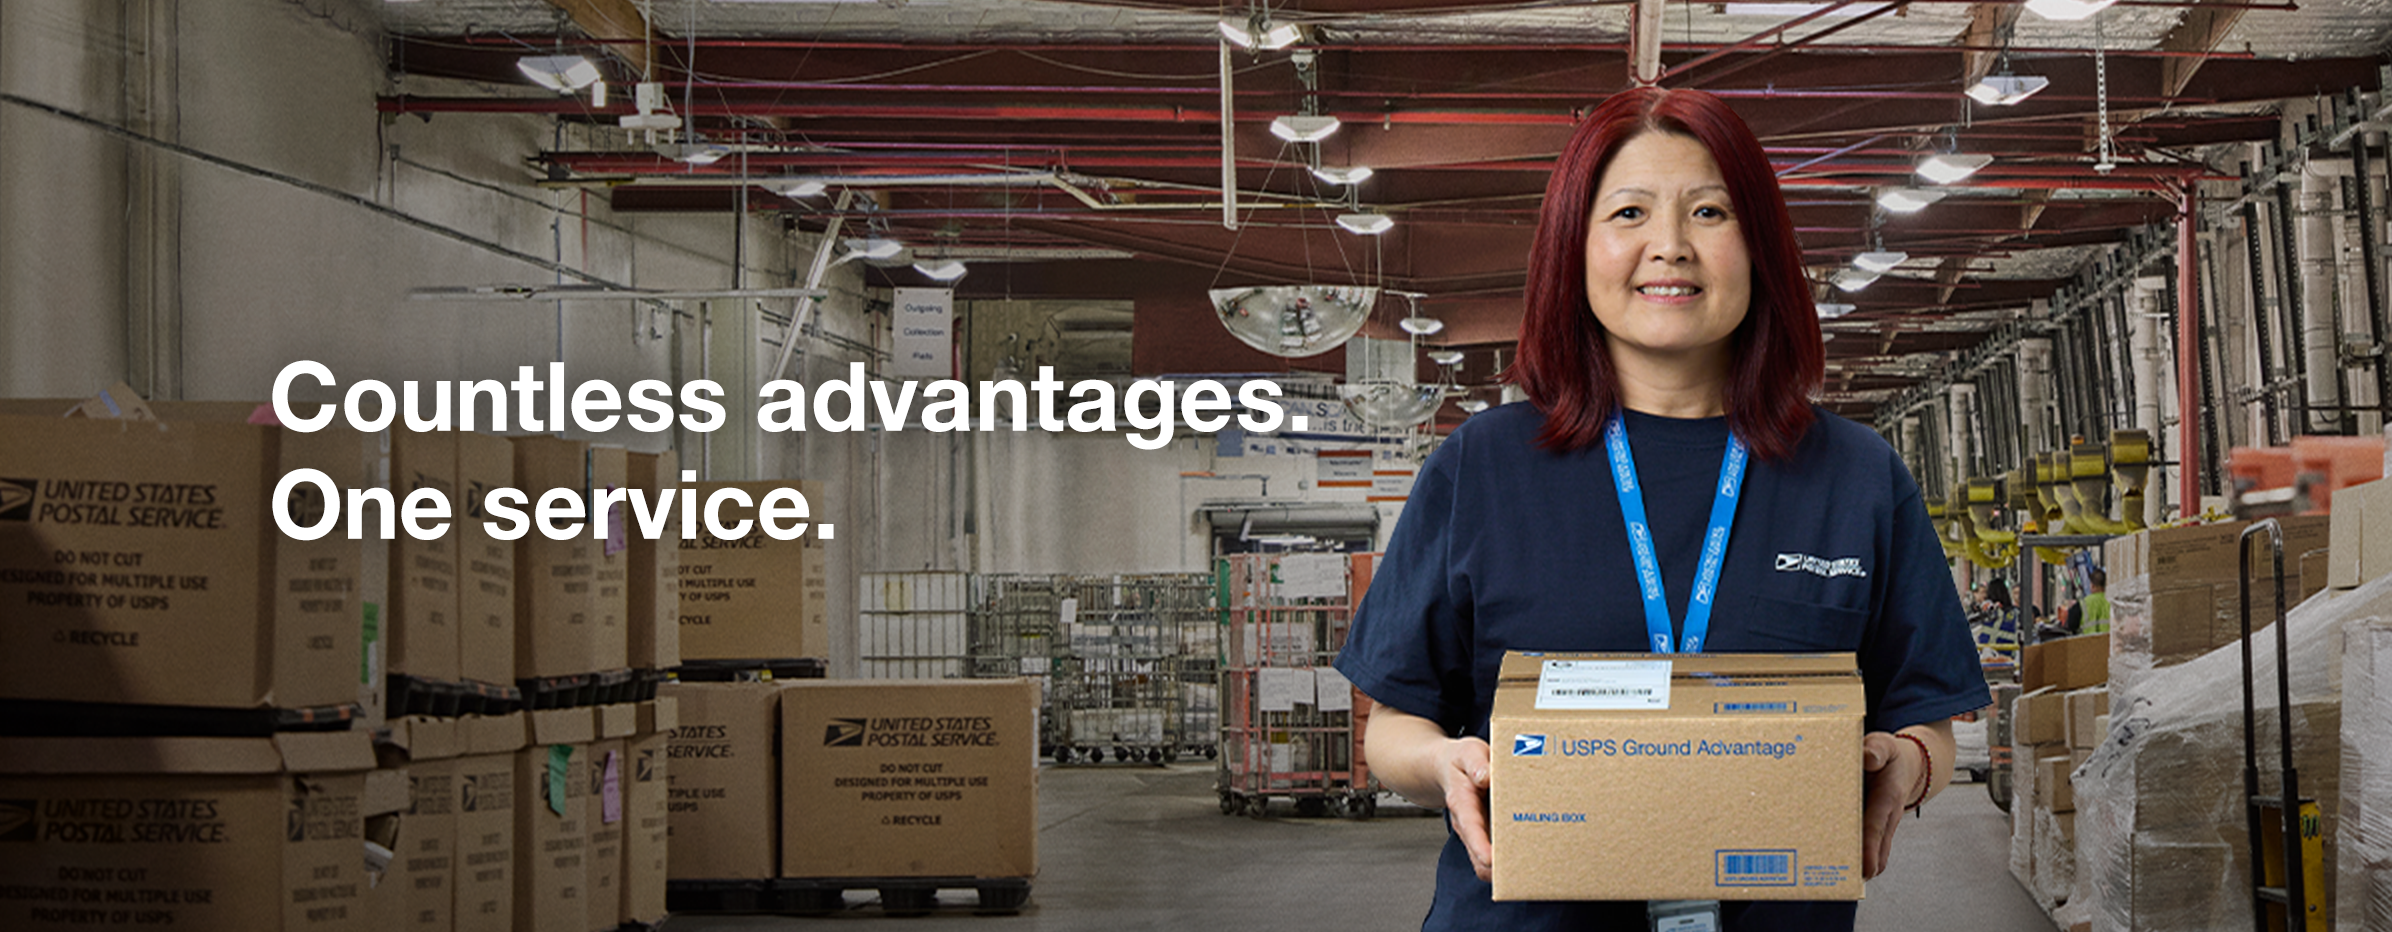 A female USPS worker carrying a brown package that has “USPS Ground Advantage®” printed on it. Image text reads “Countless advantages. One service.”